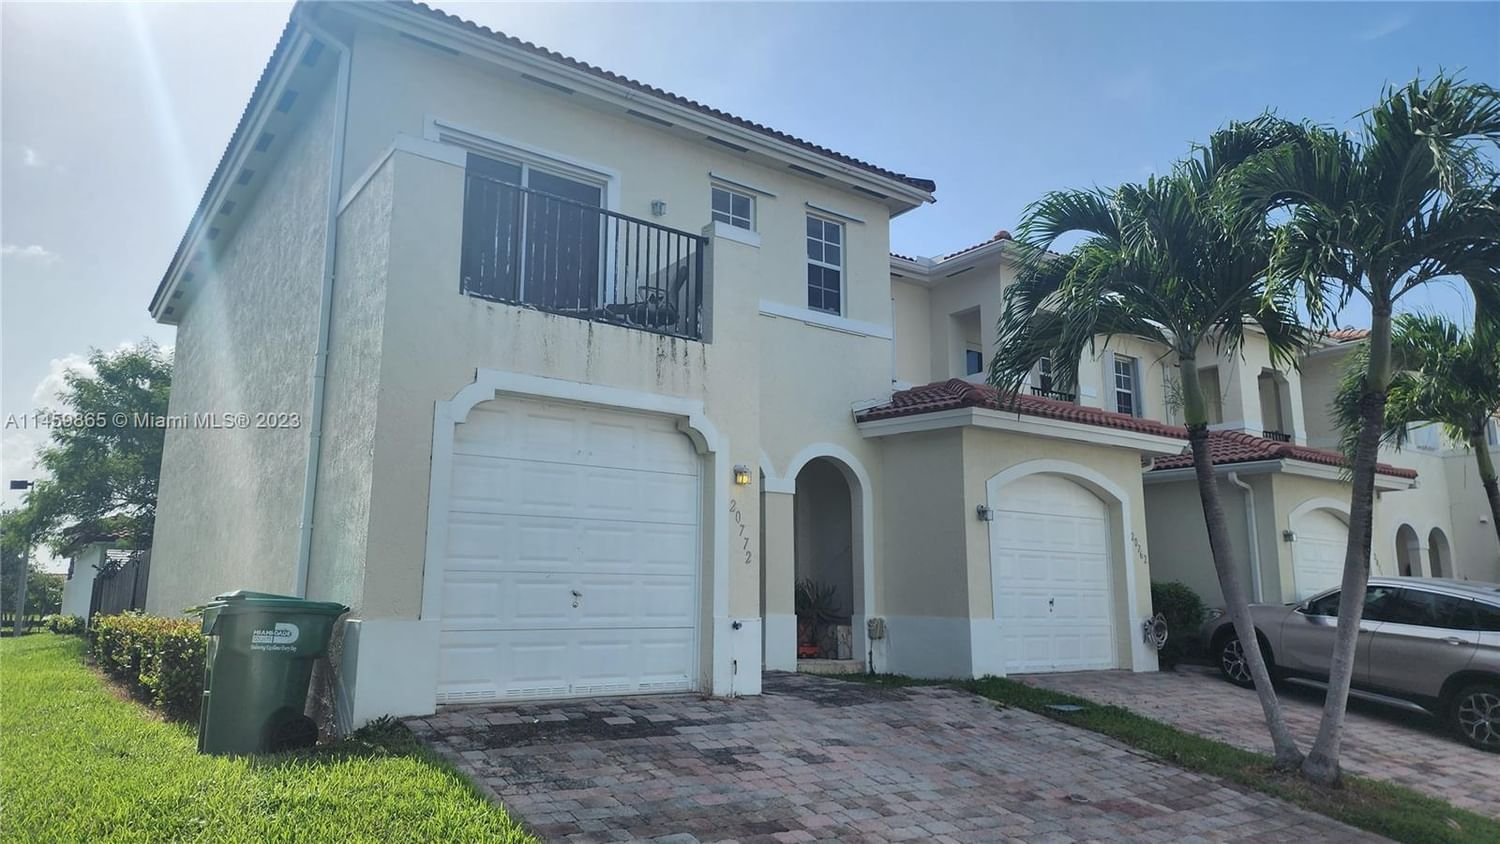 Real estate property located at 20772 80th Ct #20772, Miami-Dade County, SAGA BAY TOWNHOMES 1ST AD, Cutler Bay, FL